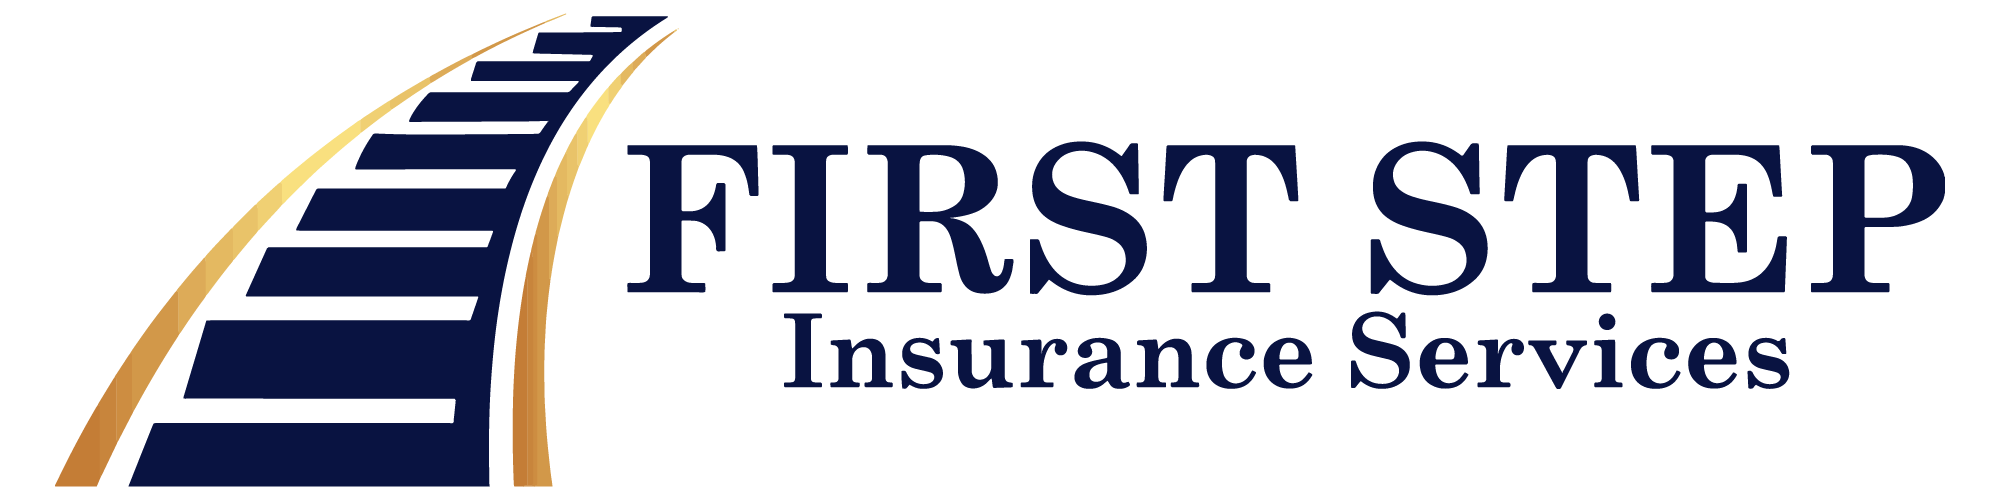 First Step Insurance Services